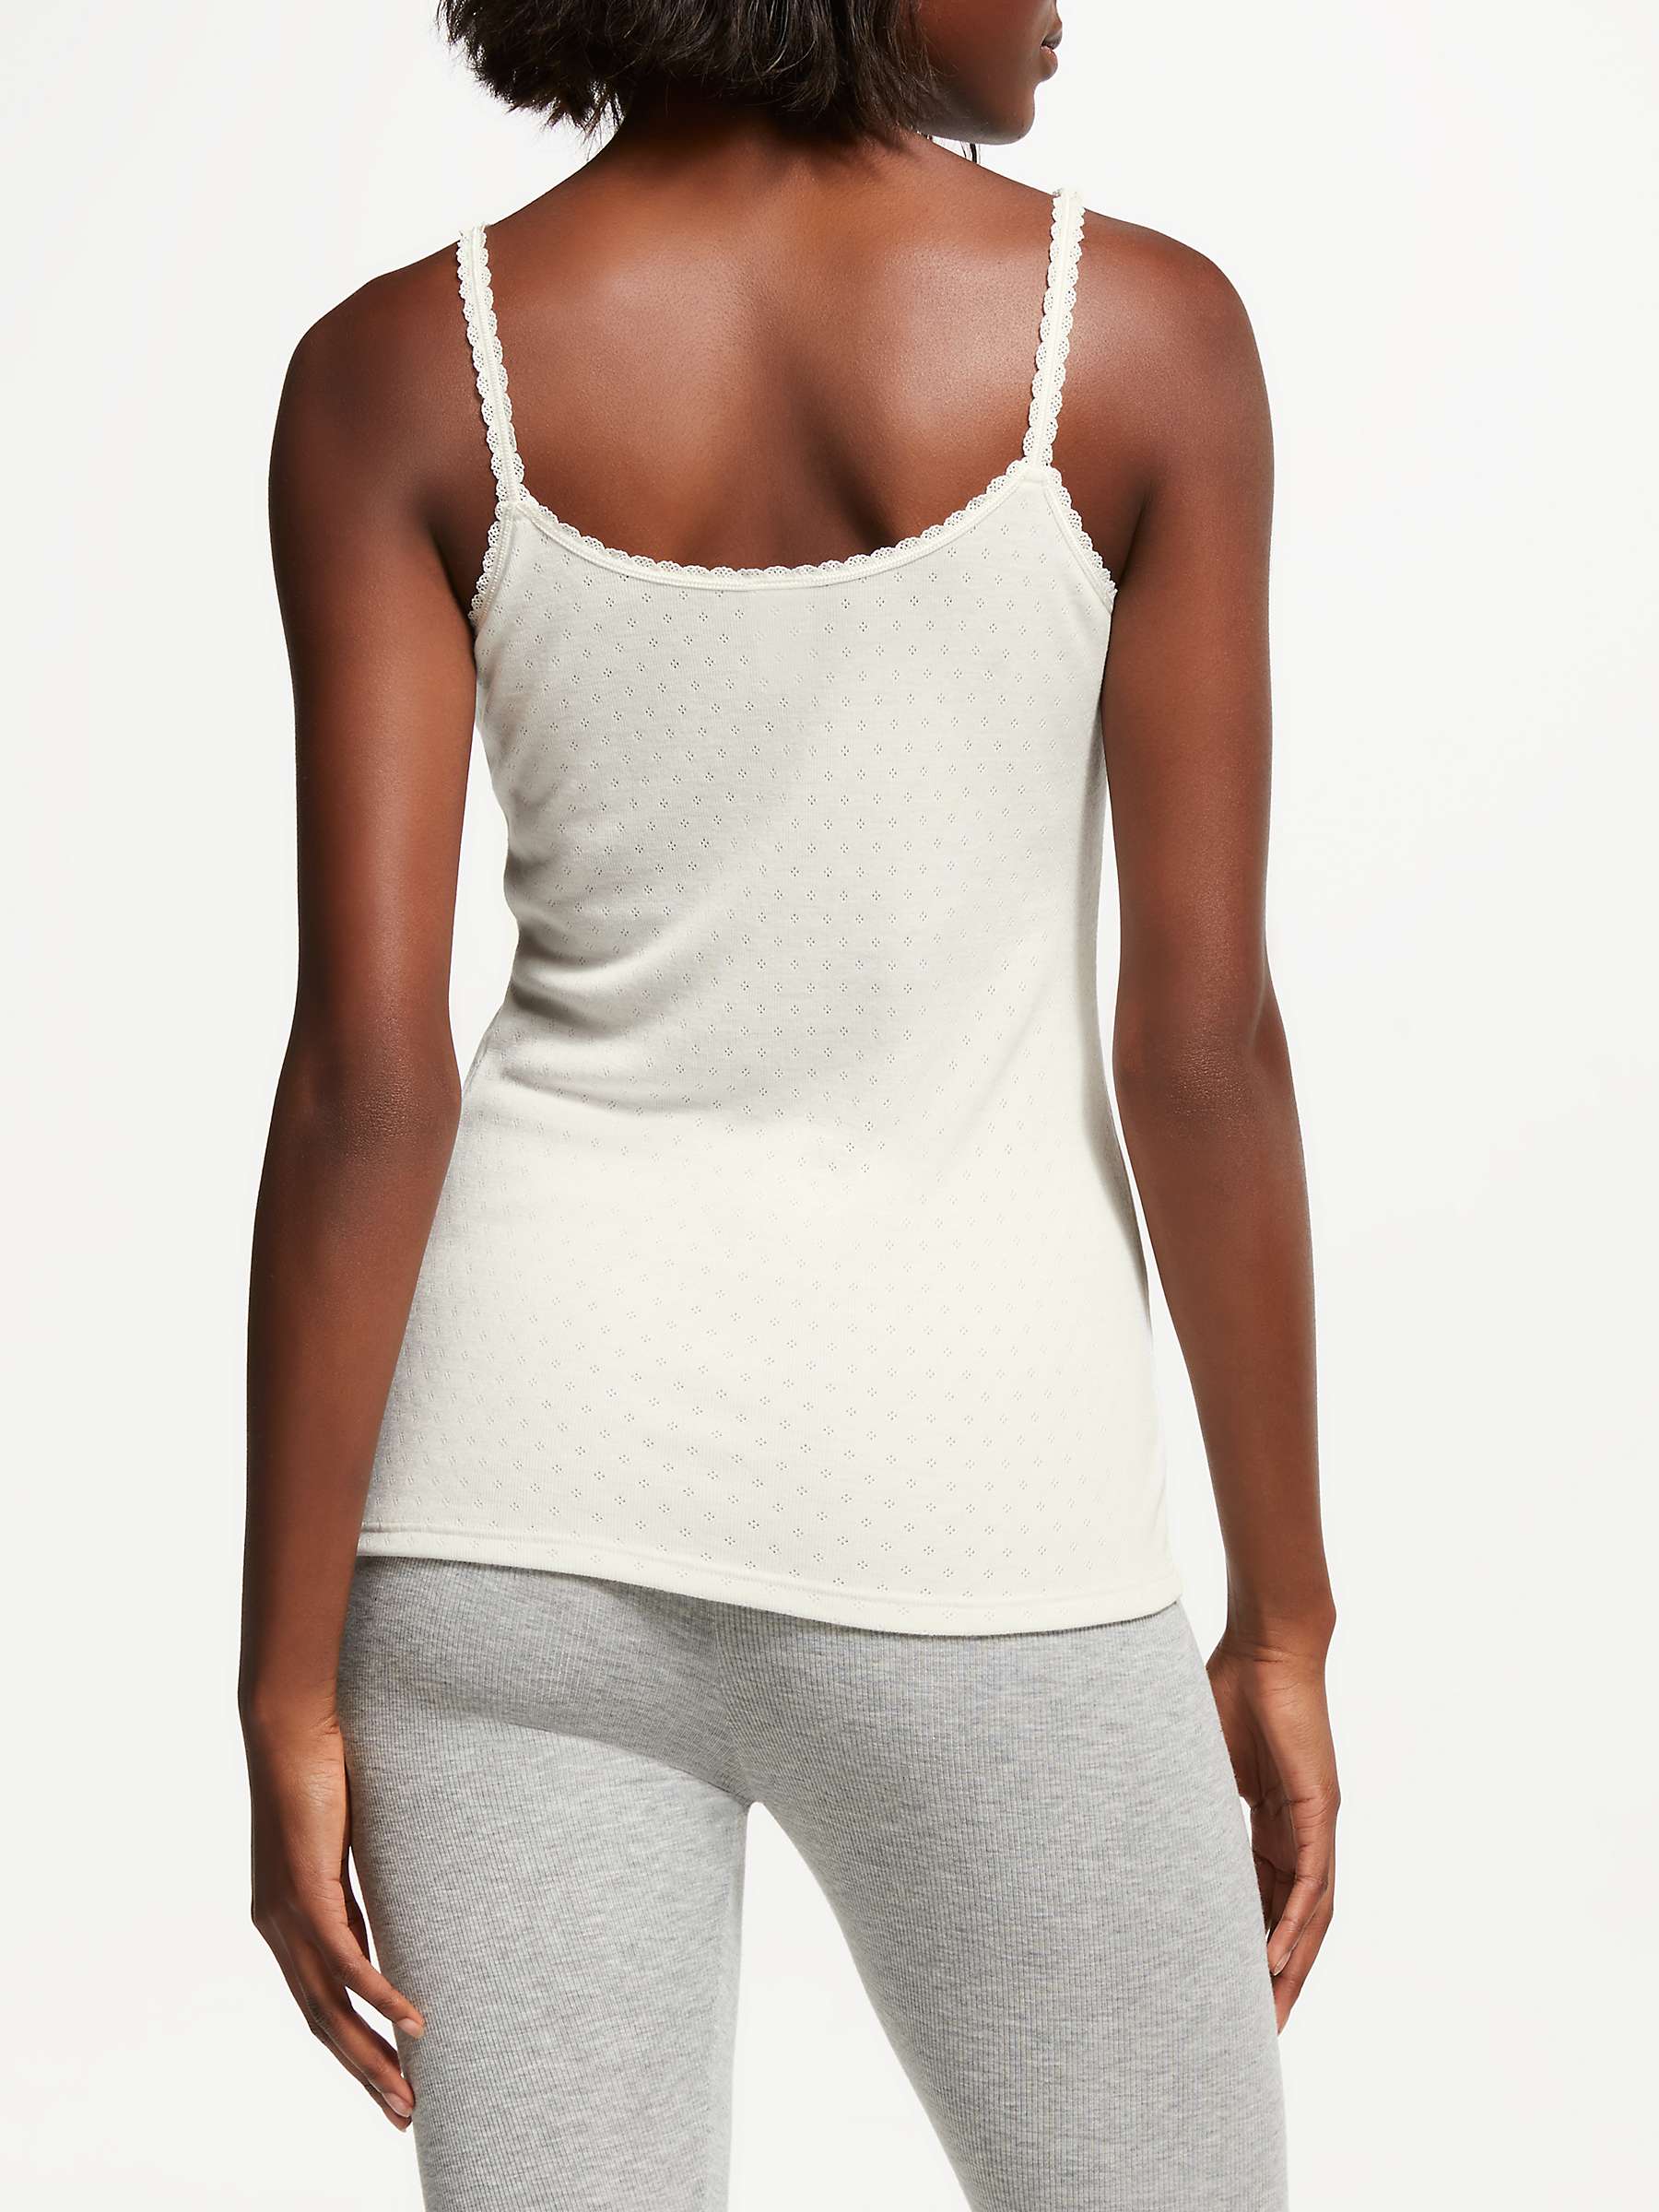 Buy John Lewis Thermal Pointelle Camisole, Ivory Online at johnlewis.com